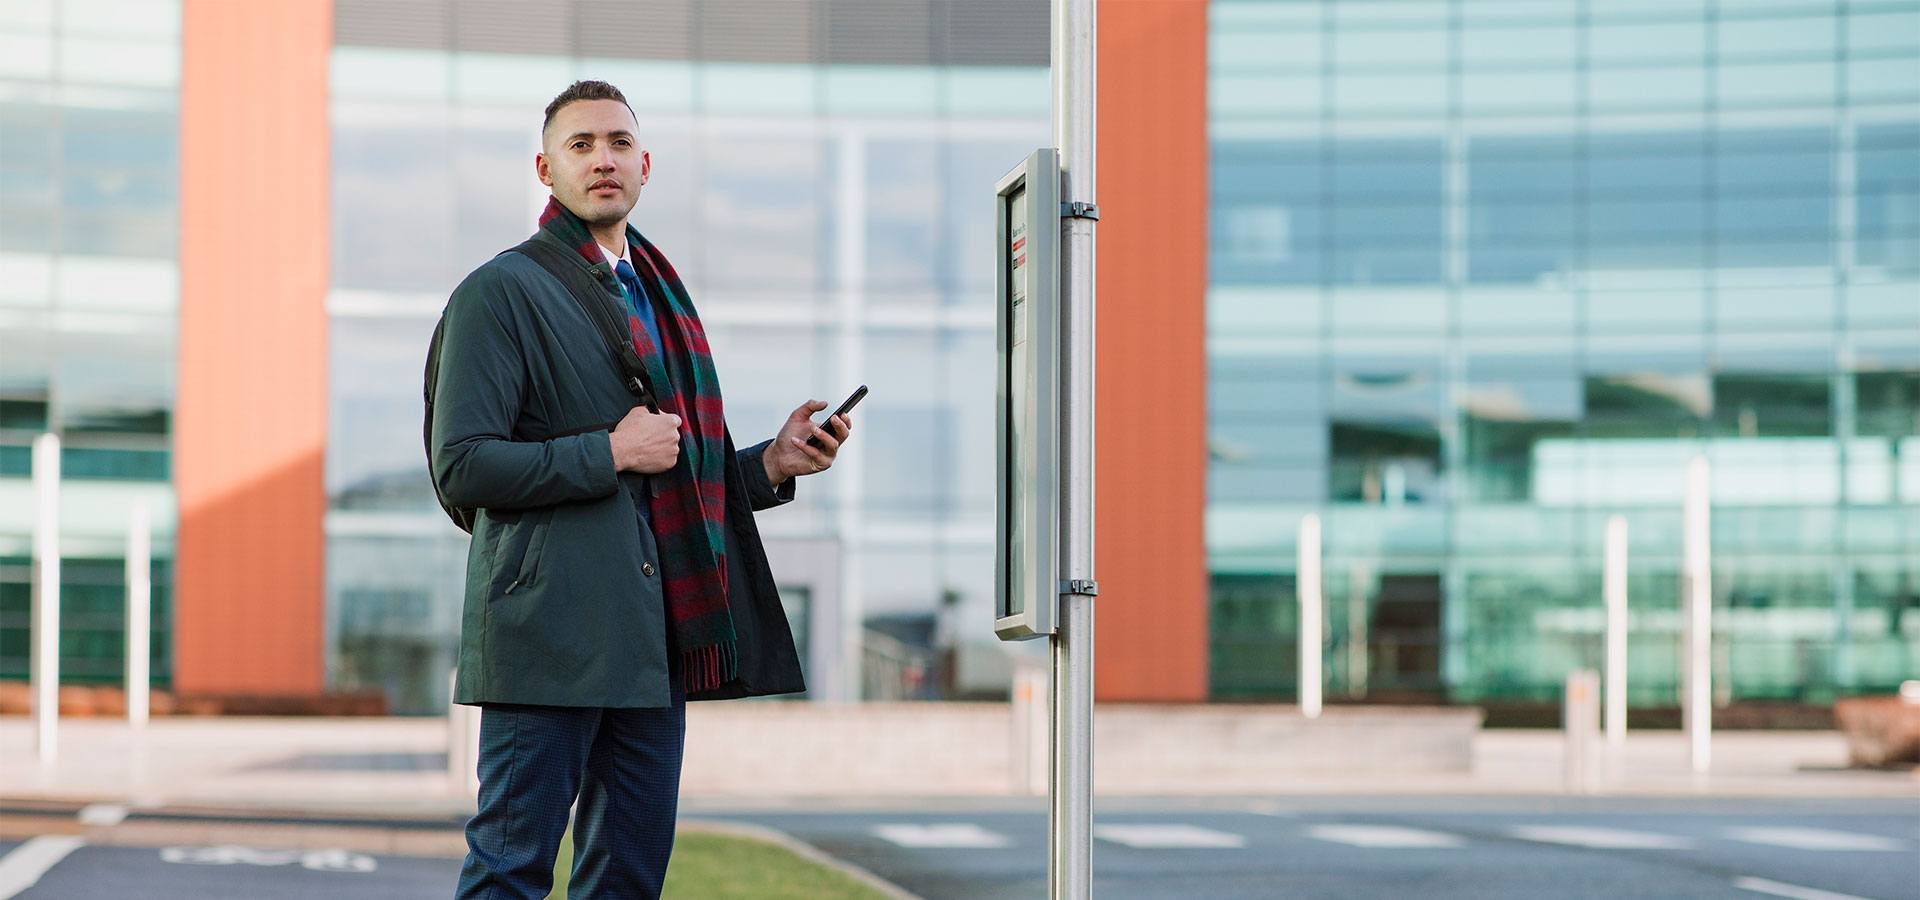 Man in front of building looking at his phone